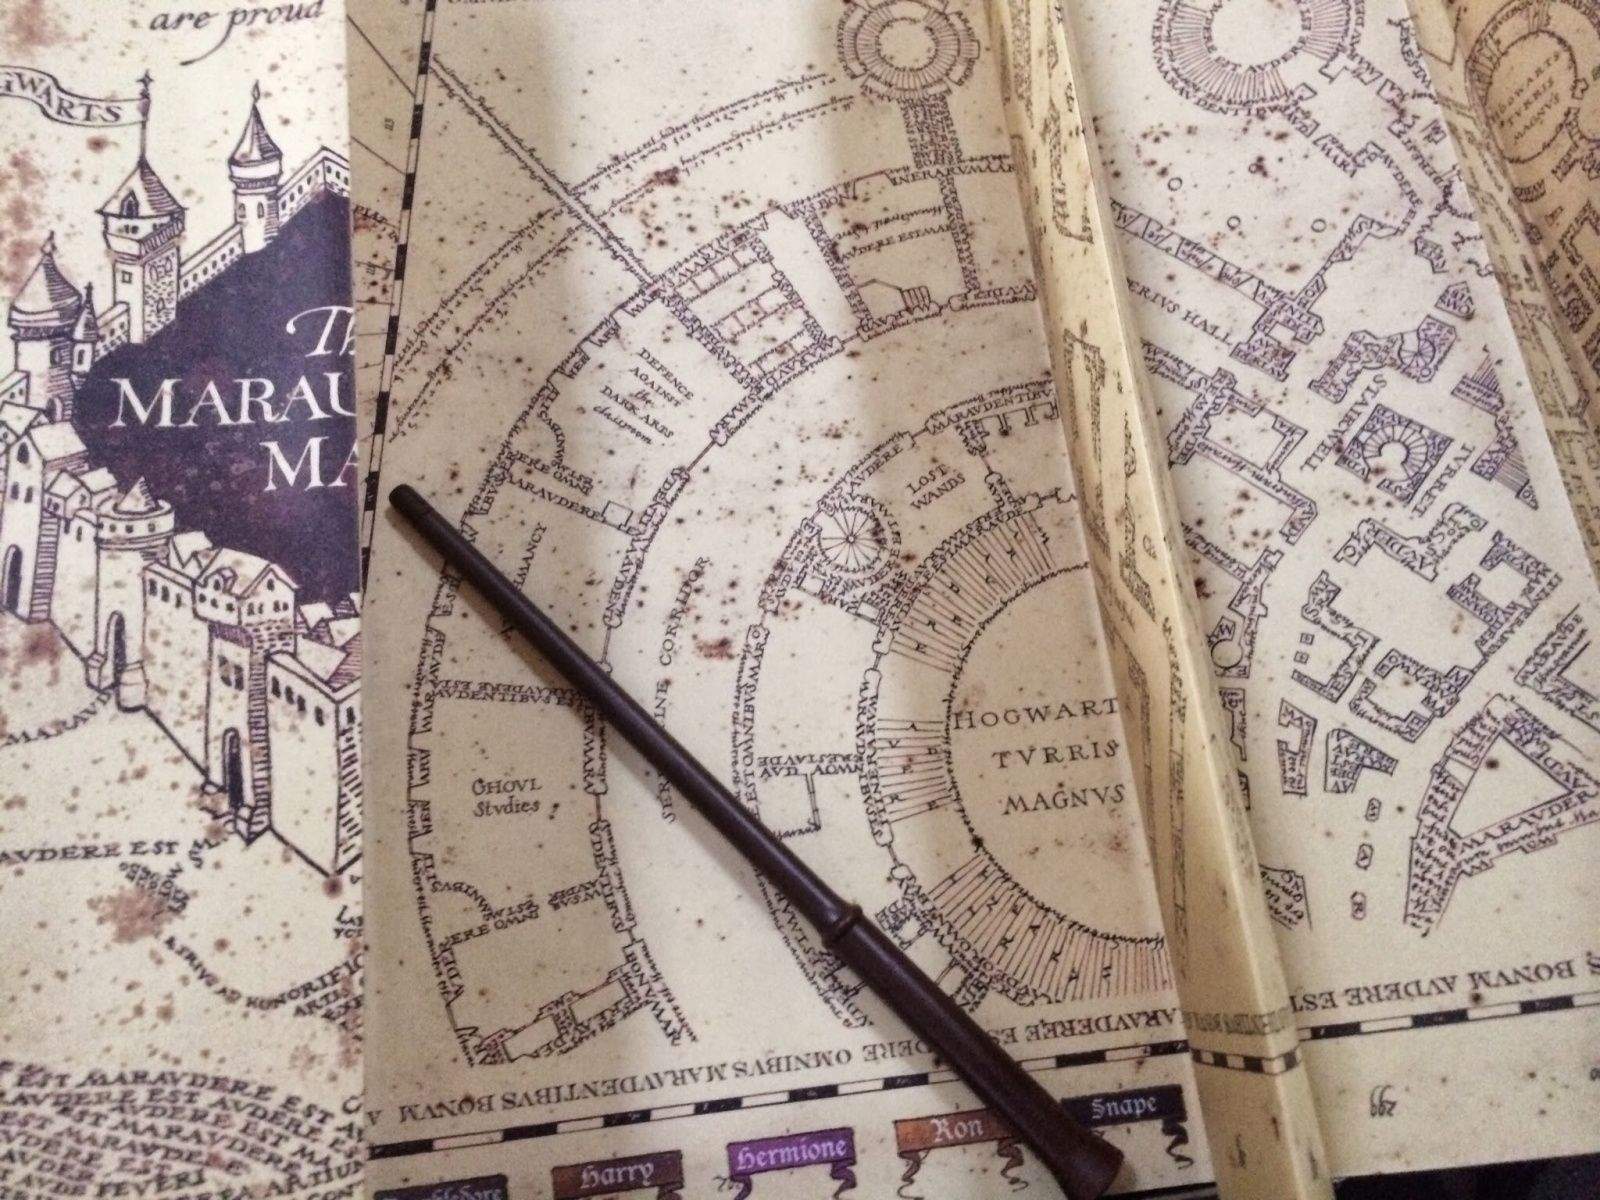 It might not quite be Harry Potter's Marauder's Map, but it's getting there. Photo: The Wizarding World of Harry Potter at Universal Orlando